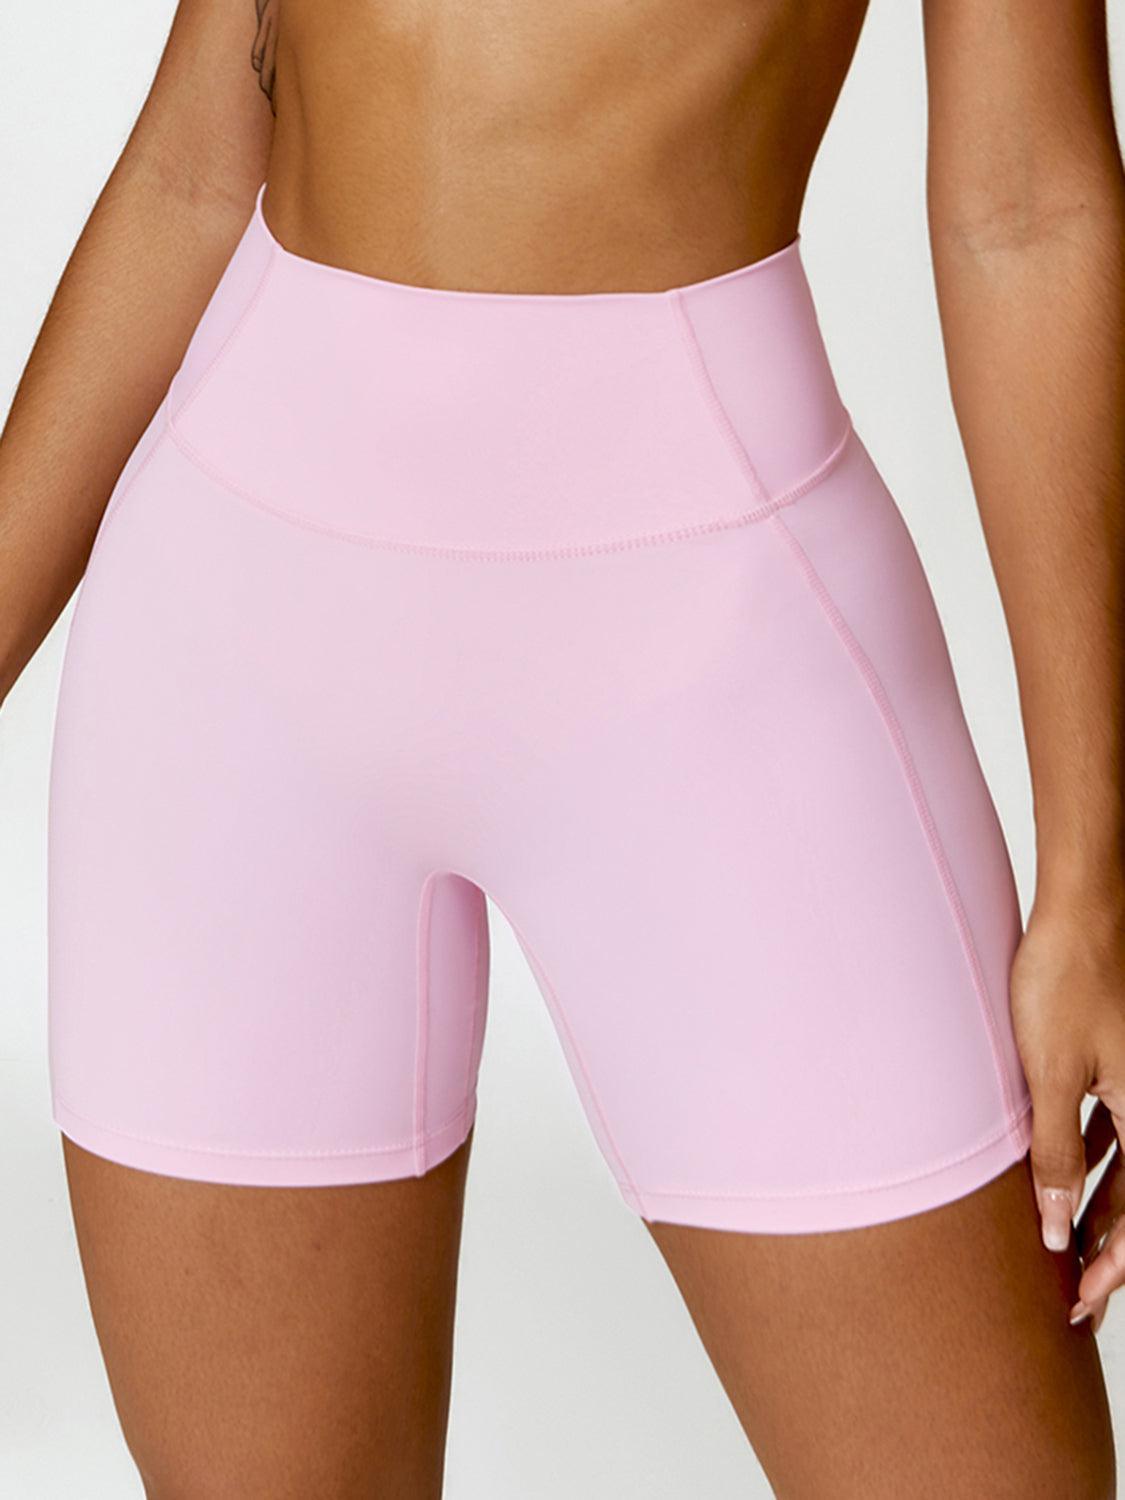 a close up of a person wearing a pink shorts